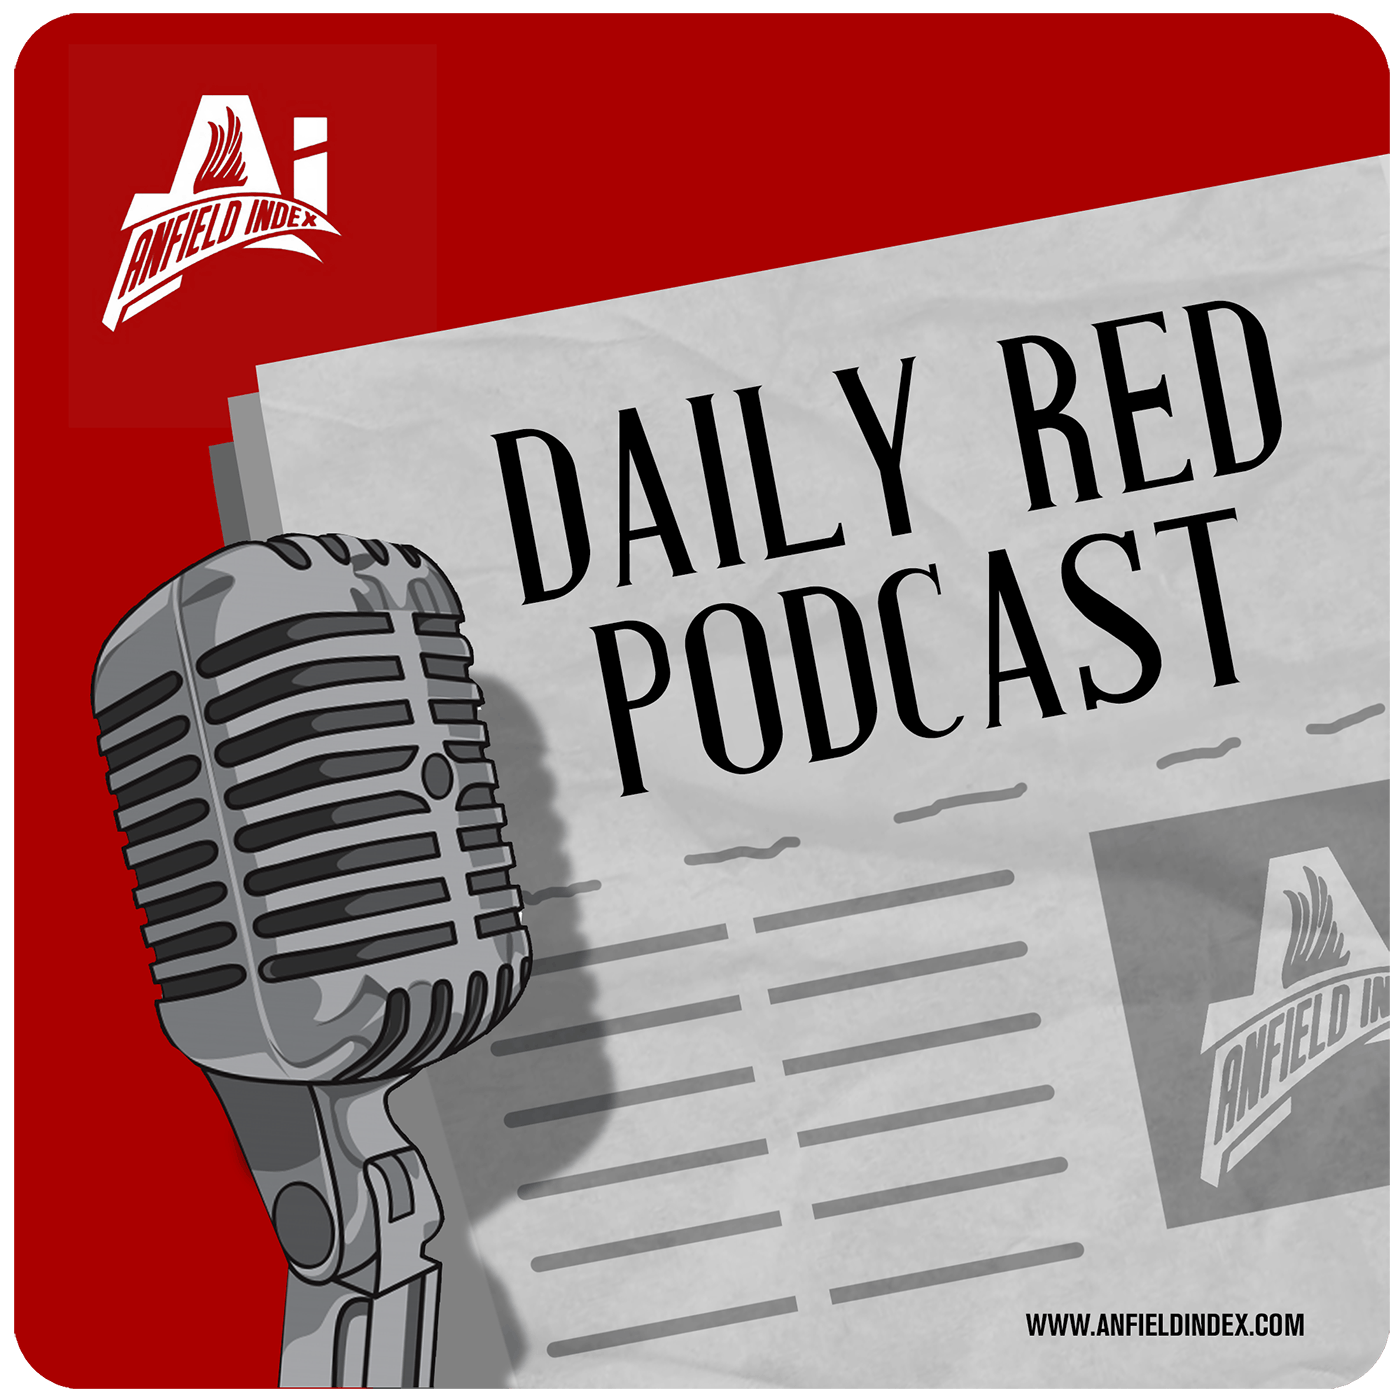 Win Over Southampton - Daily Red Podcast